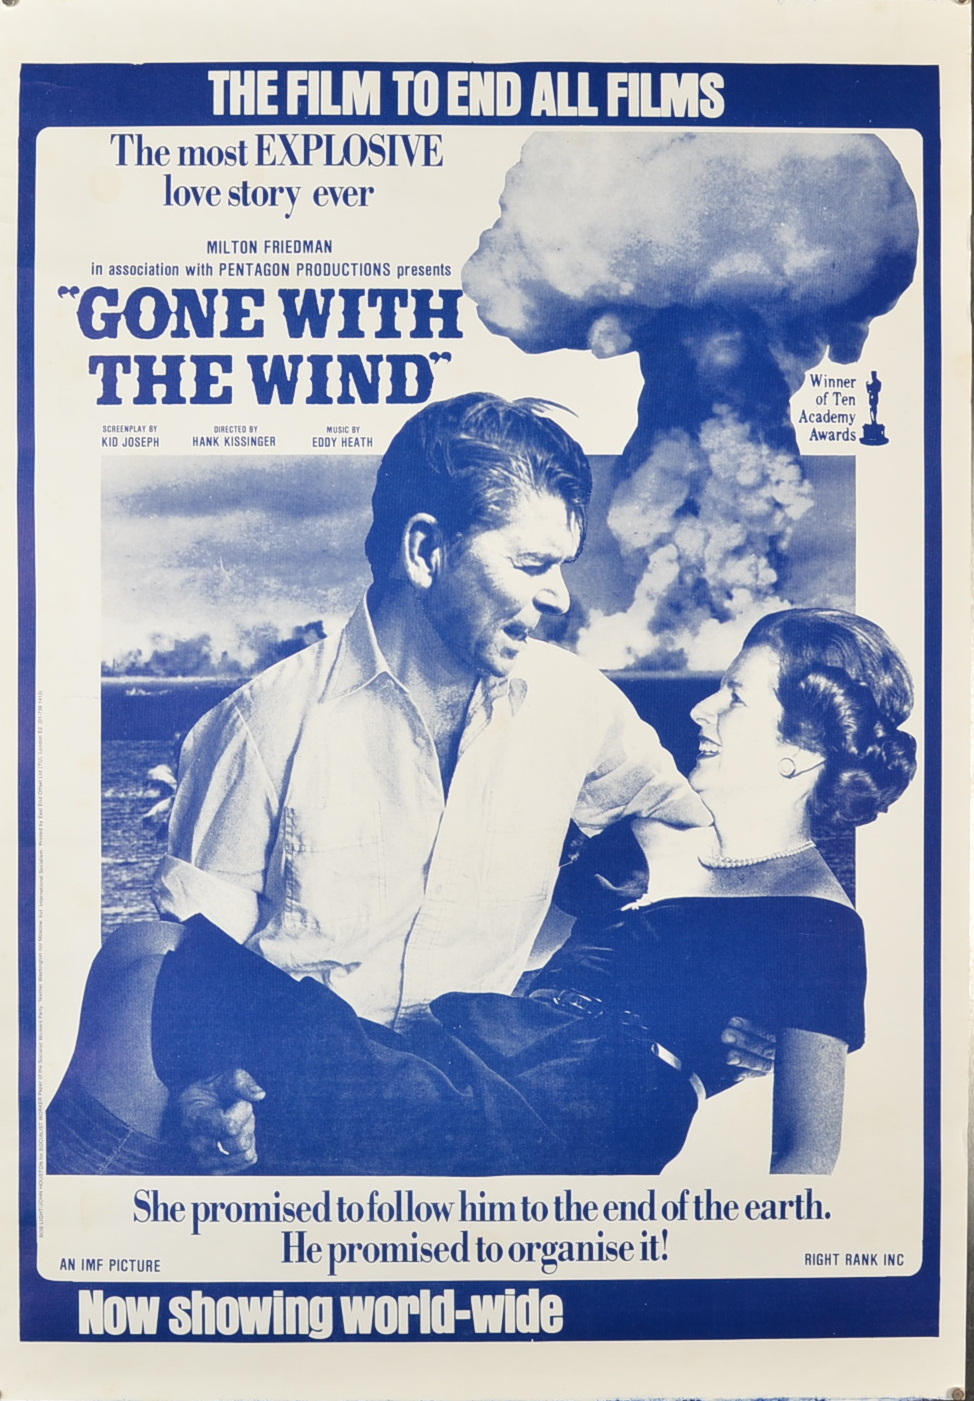 Political Satire Poster
Gone With The Wind
'Reagan and Thatcher'
1980's
65 x 45cm